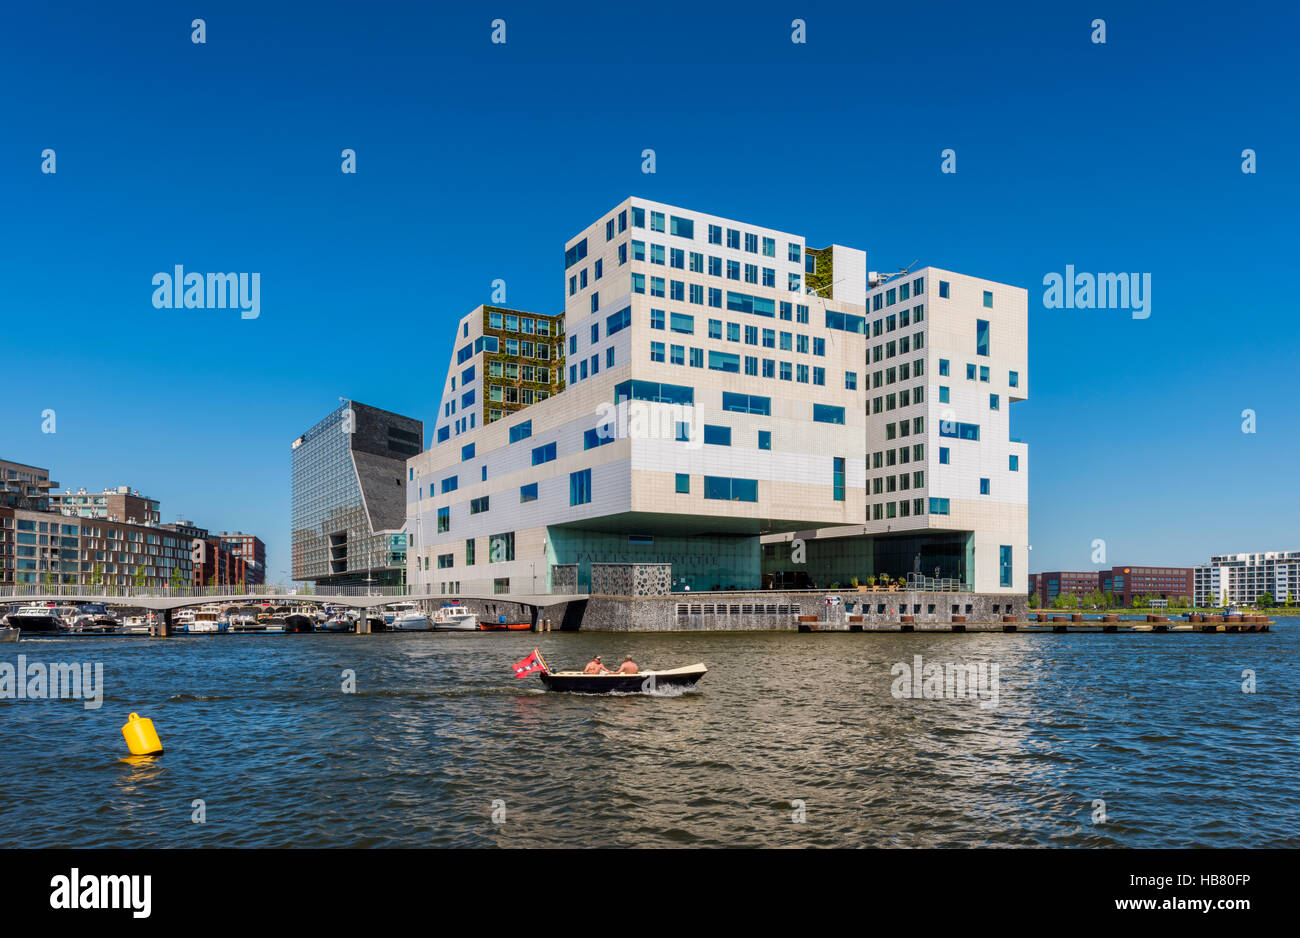 Palace of Justice Amsterdam Stock Photo